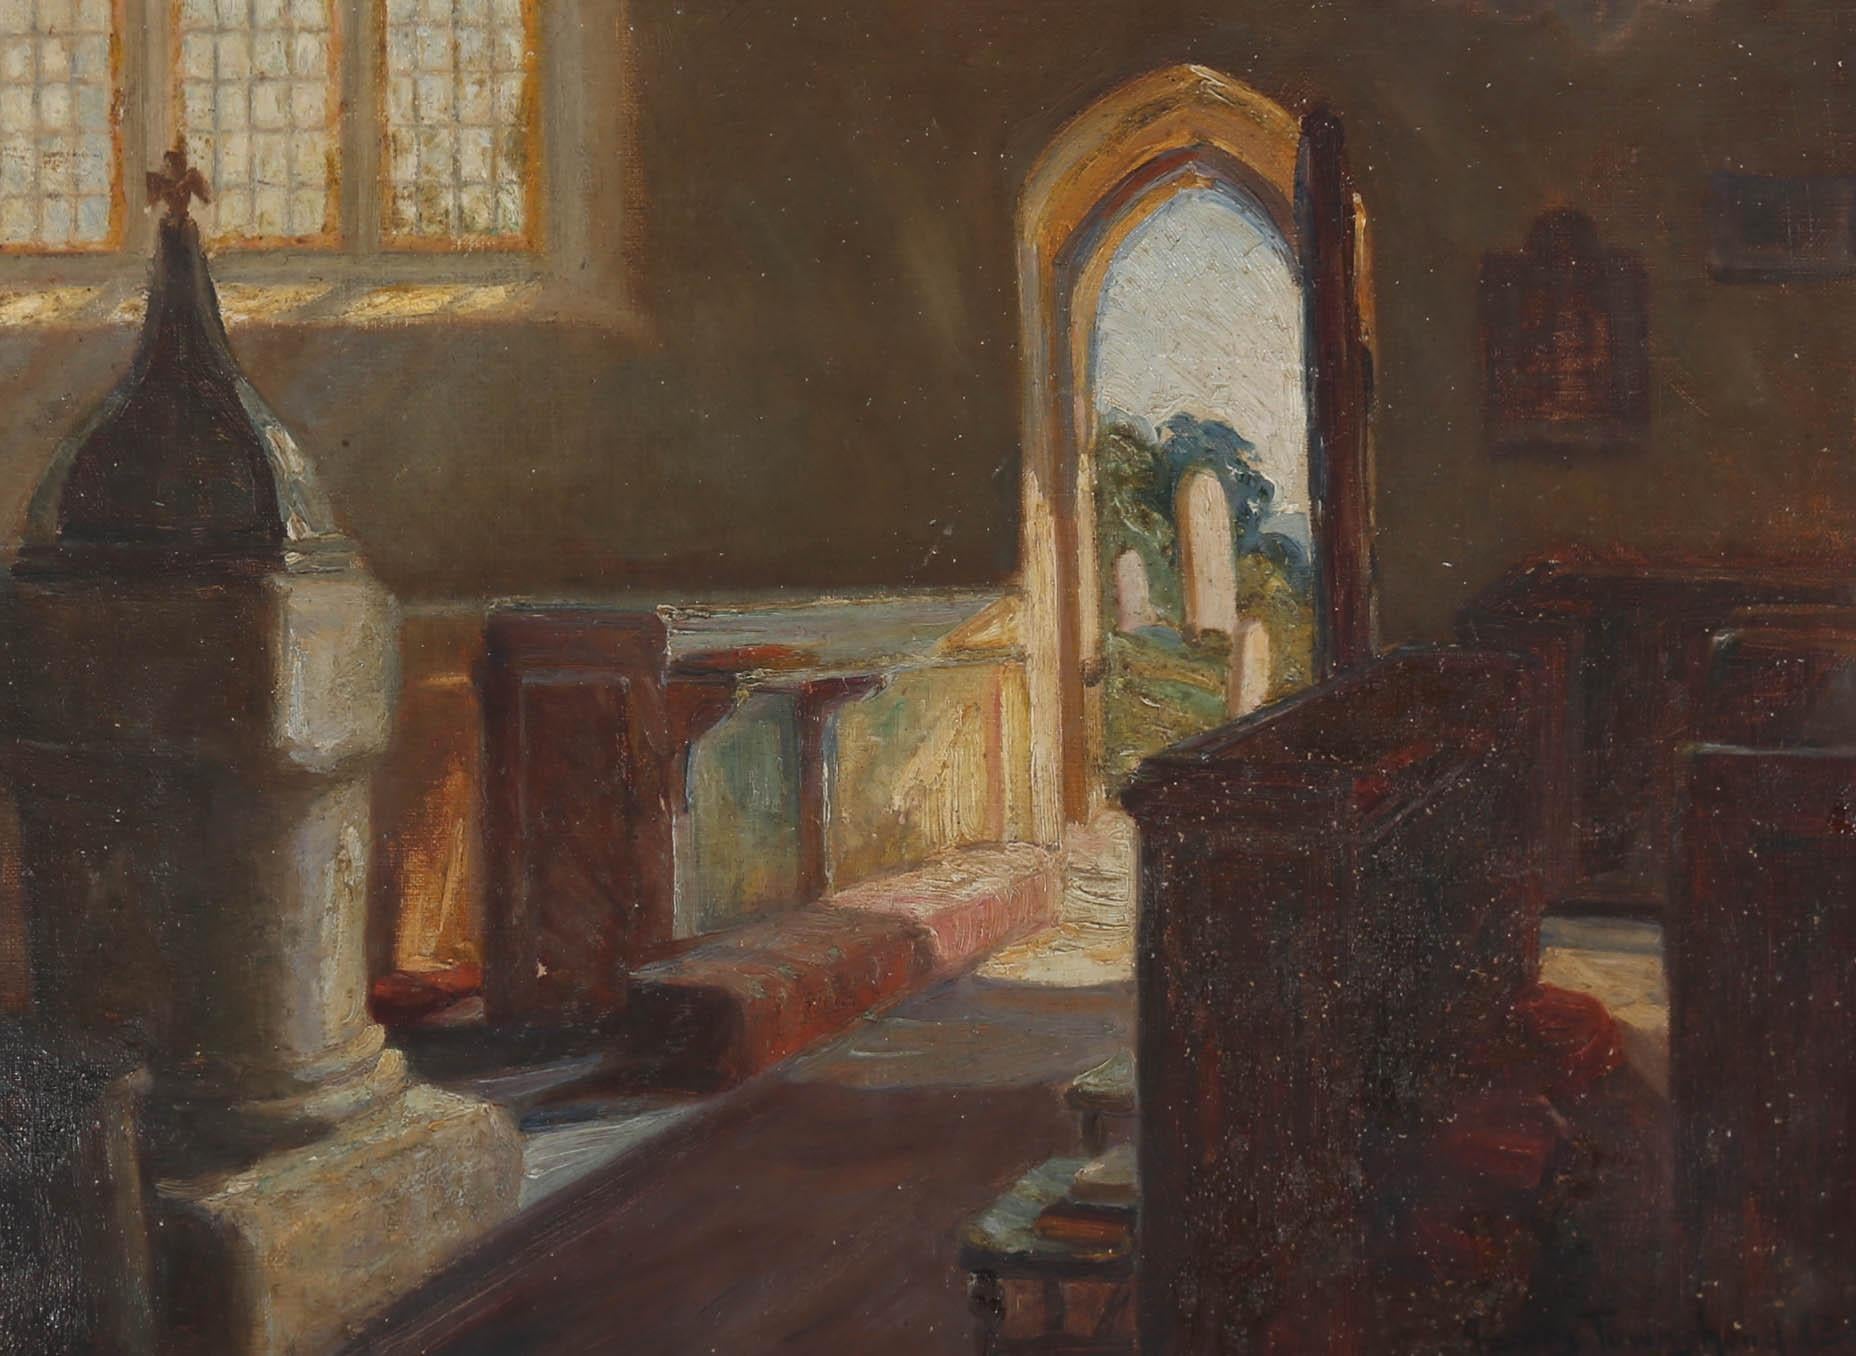 A charming early 20th Century interior scene showing a view of the inside of the Salcombe Regis Church, with sunlight pouring in through the open door, falling across the pews. The painting has a joyful Spring atmosphere. The artist has signed to